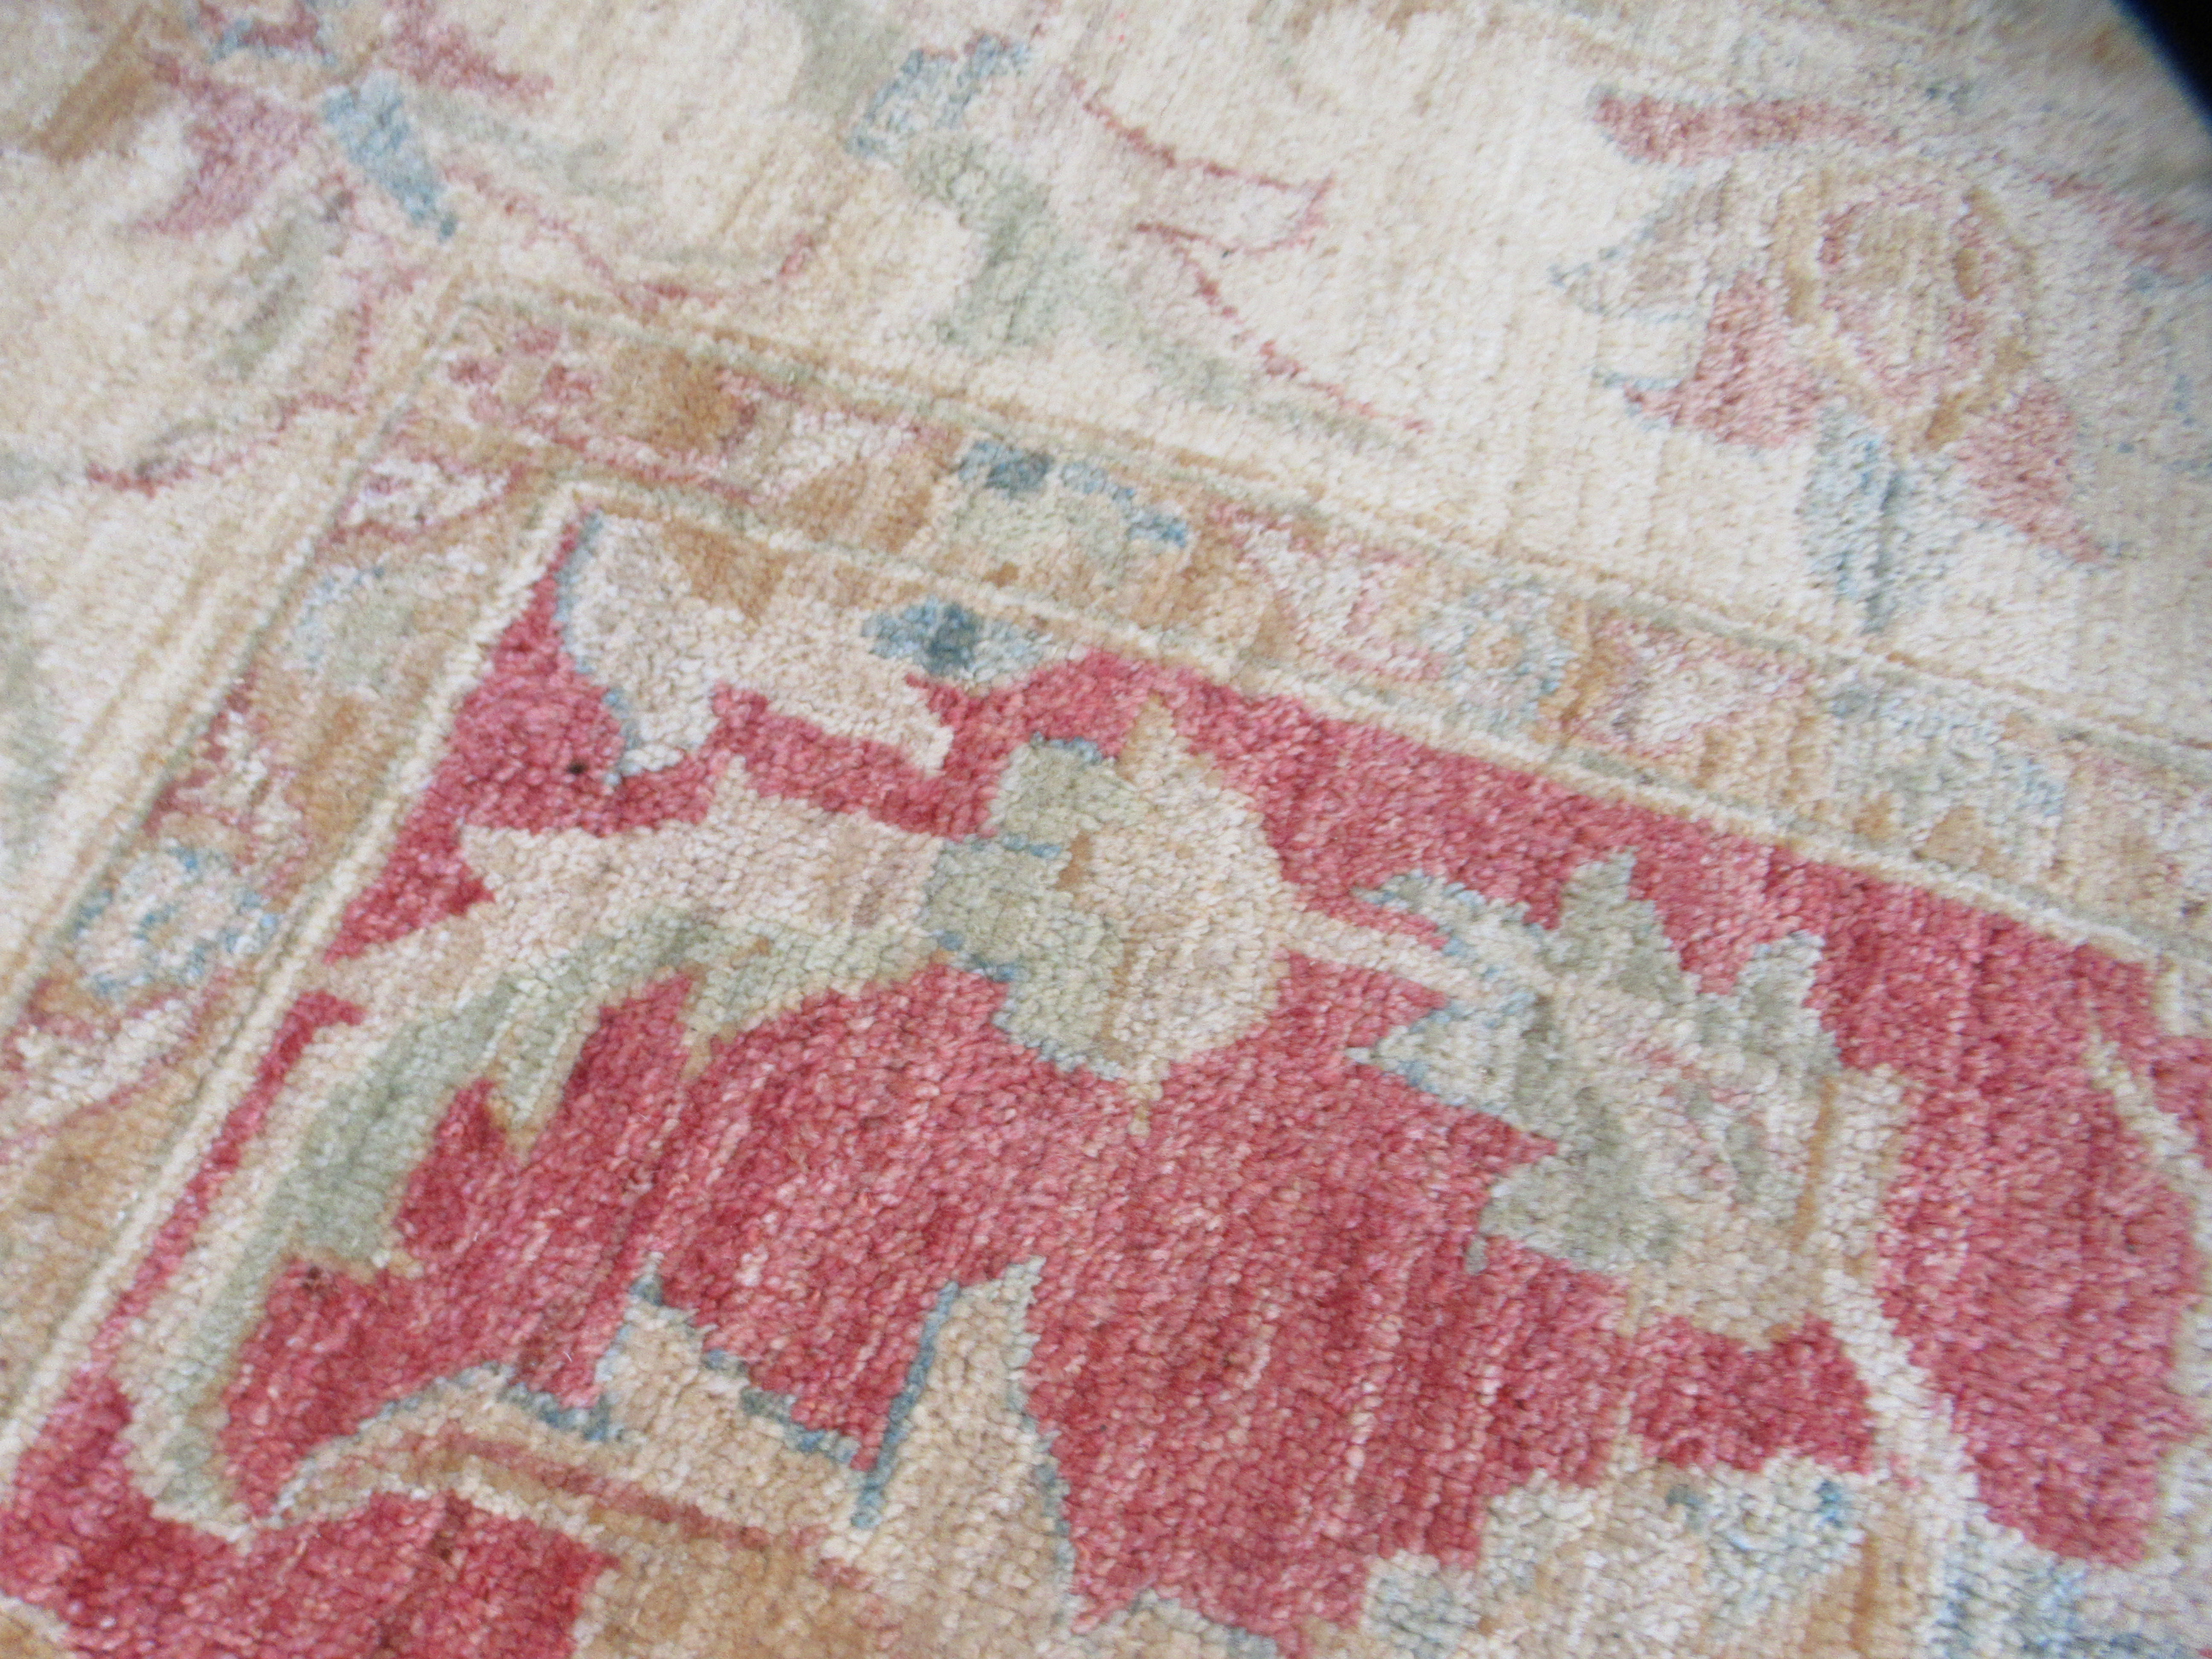 A Ziegler rug, decorated with foliate designs, on a red and cream coloured ground  79" x 78" - Image 5 of 6